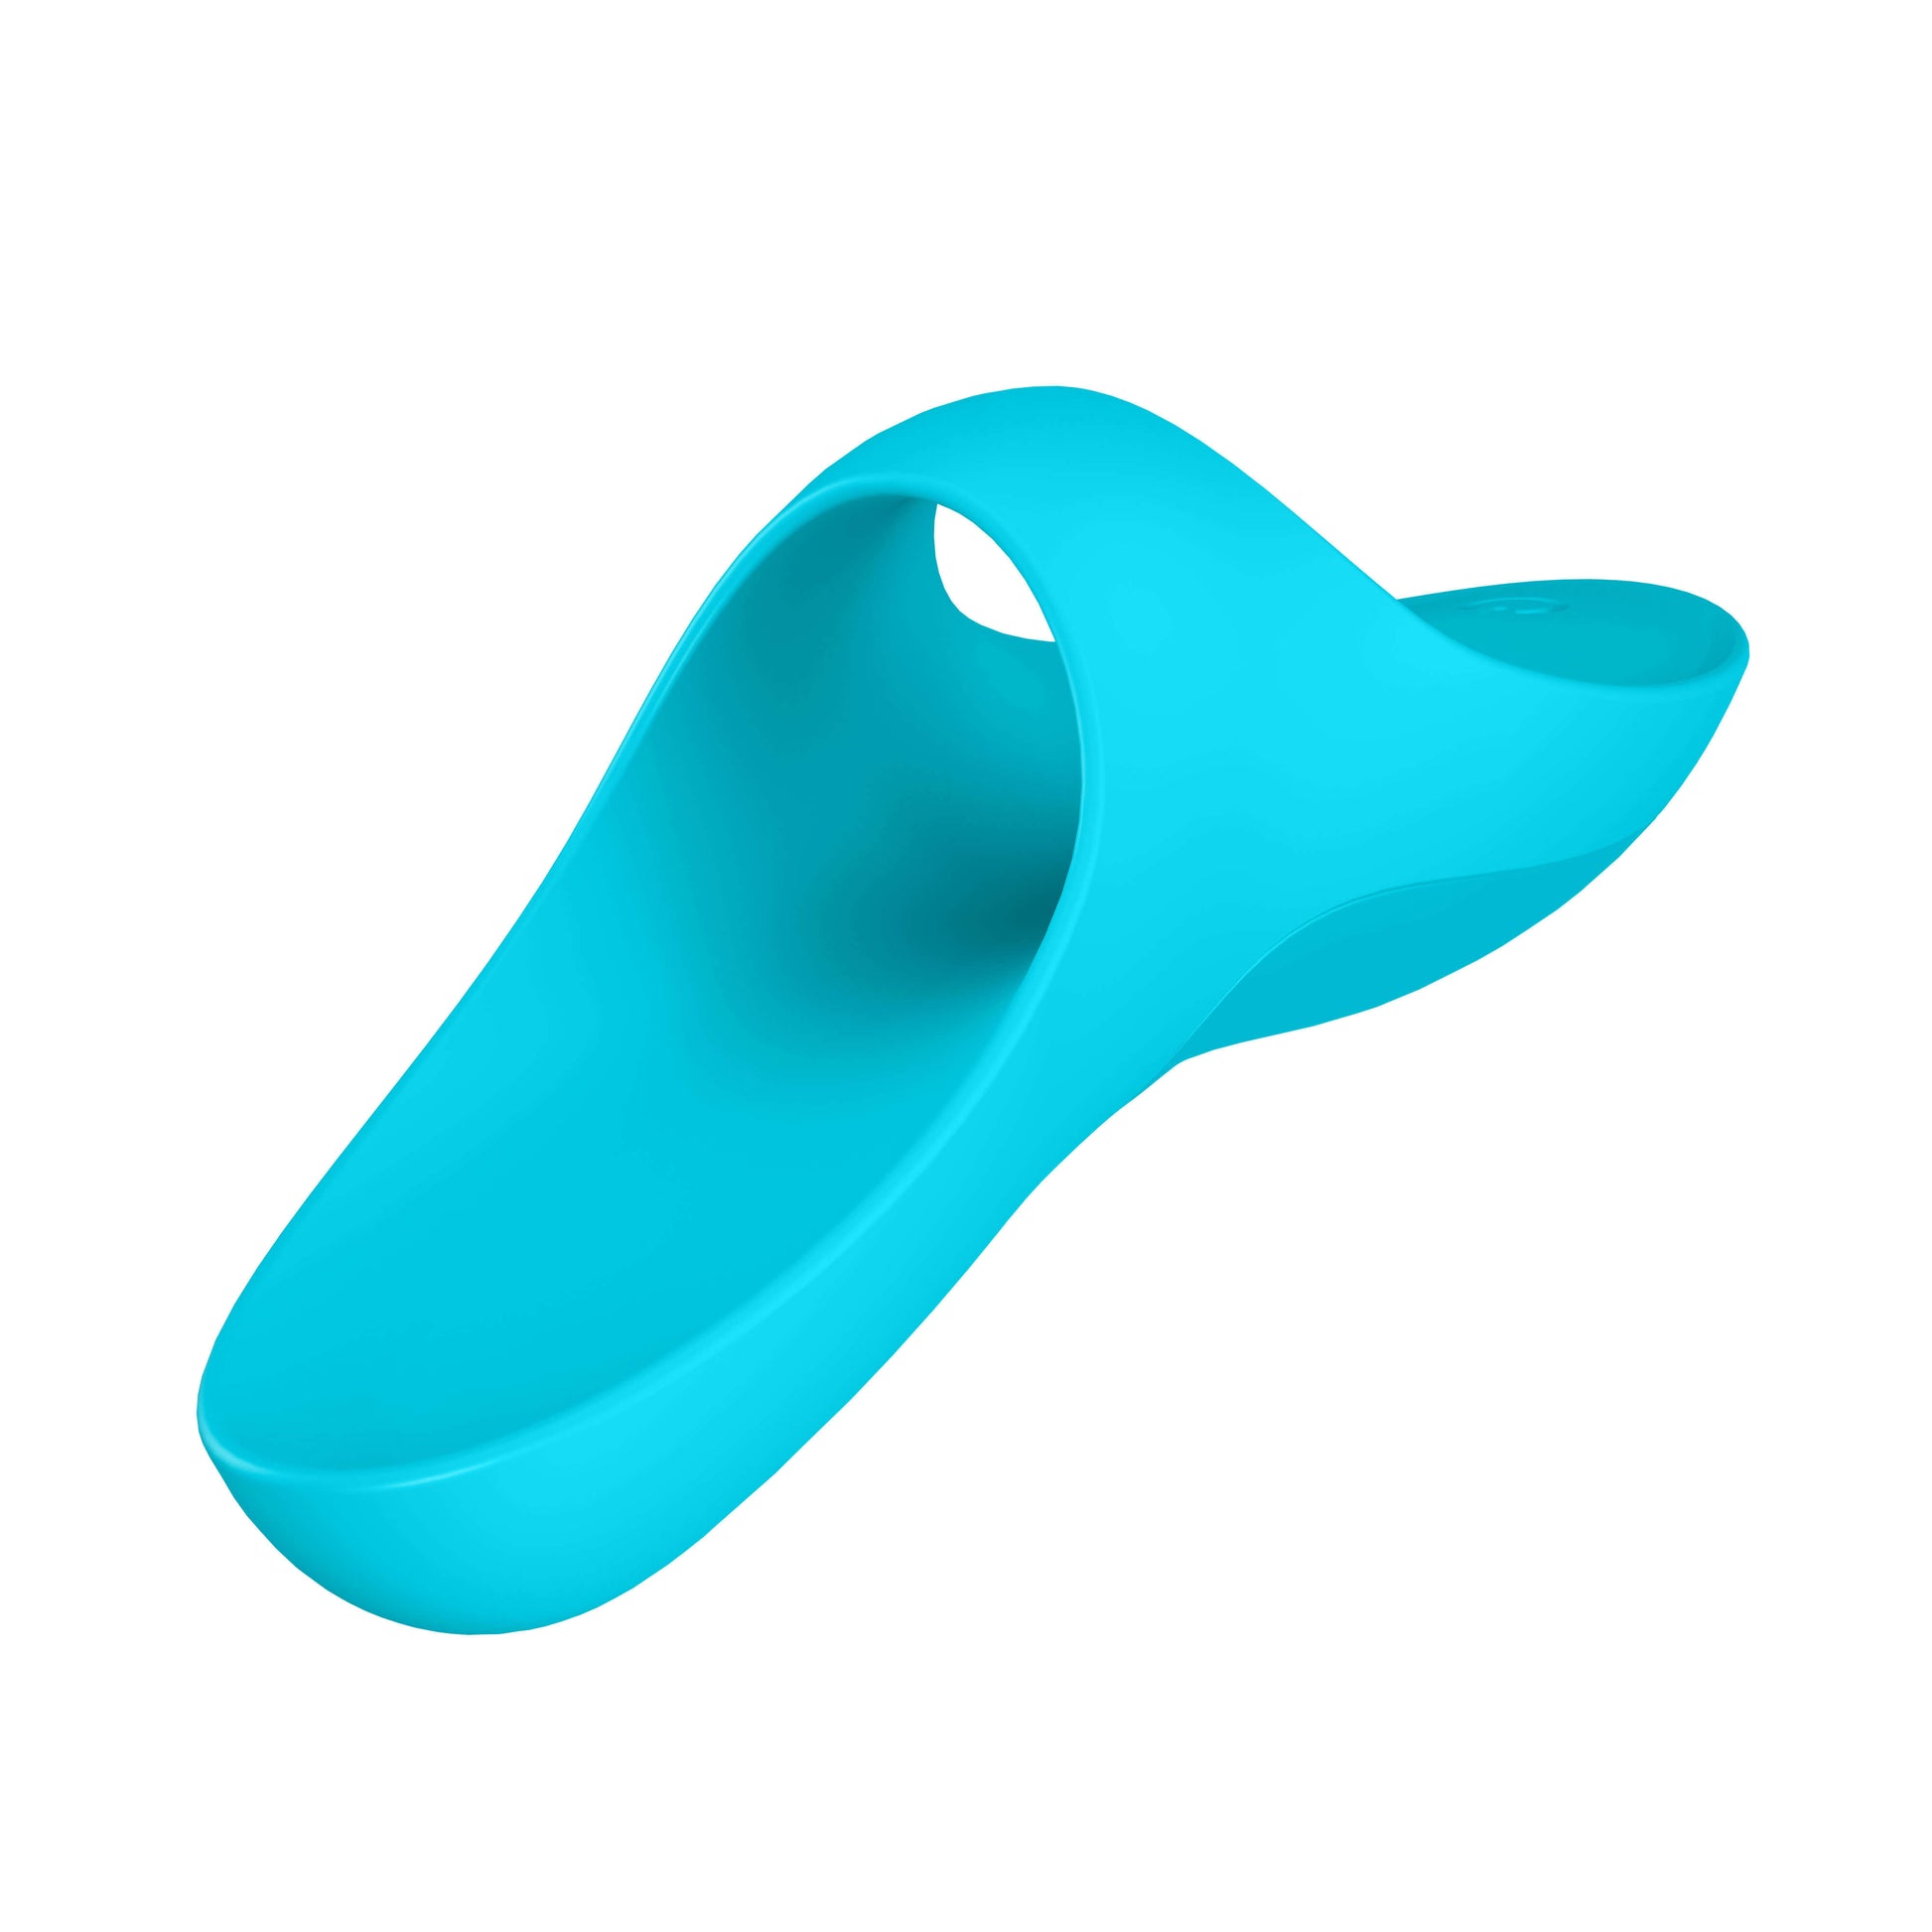 Satisfyer Teaser in light blue - by The Bigger O an online sex toy shop. We ship to USA, Canada and the UK.